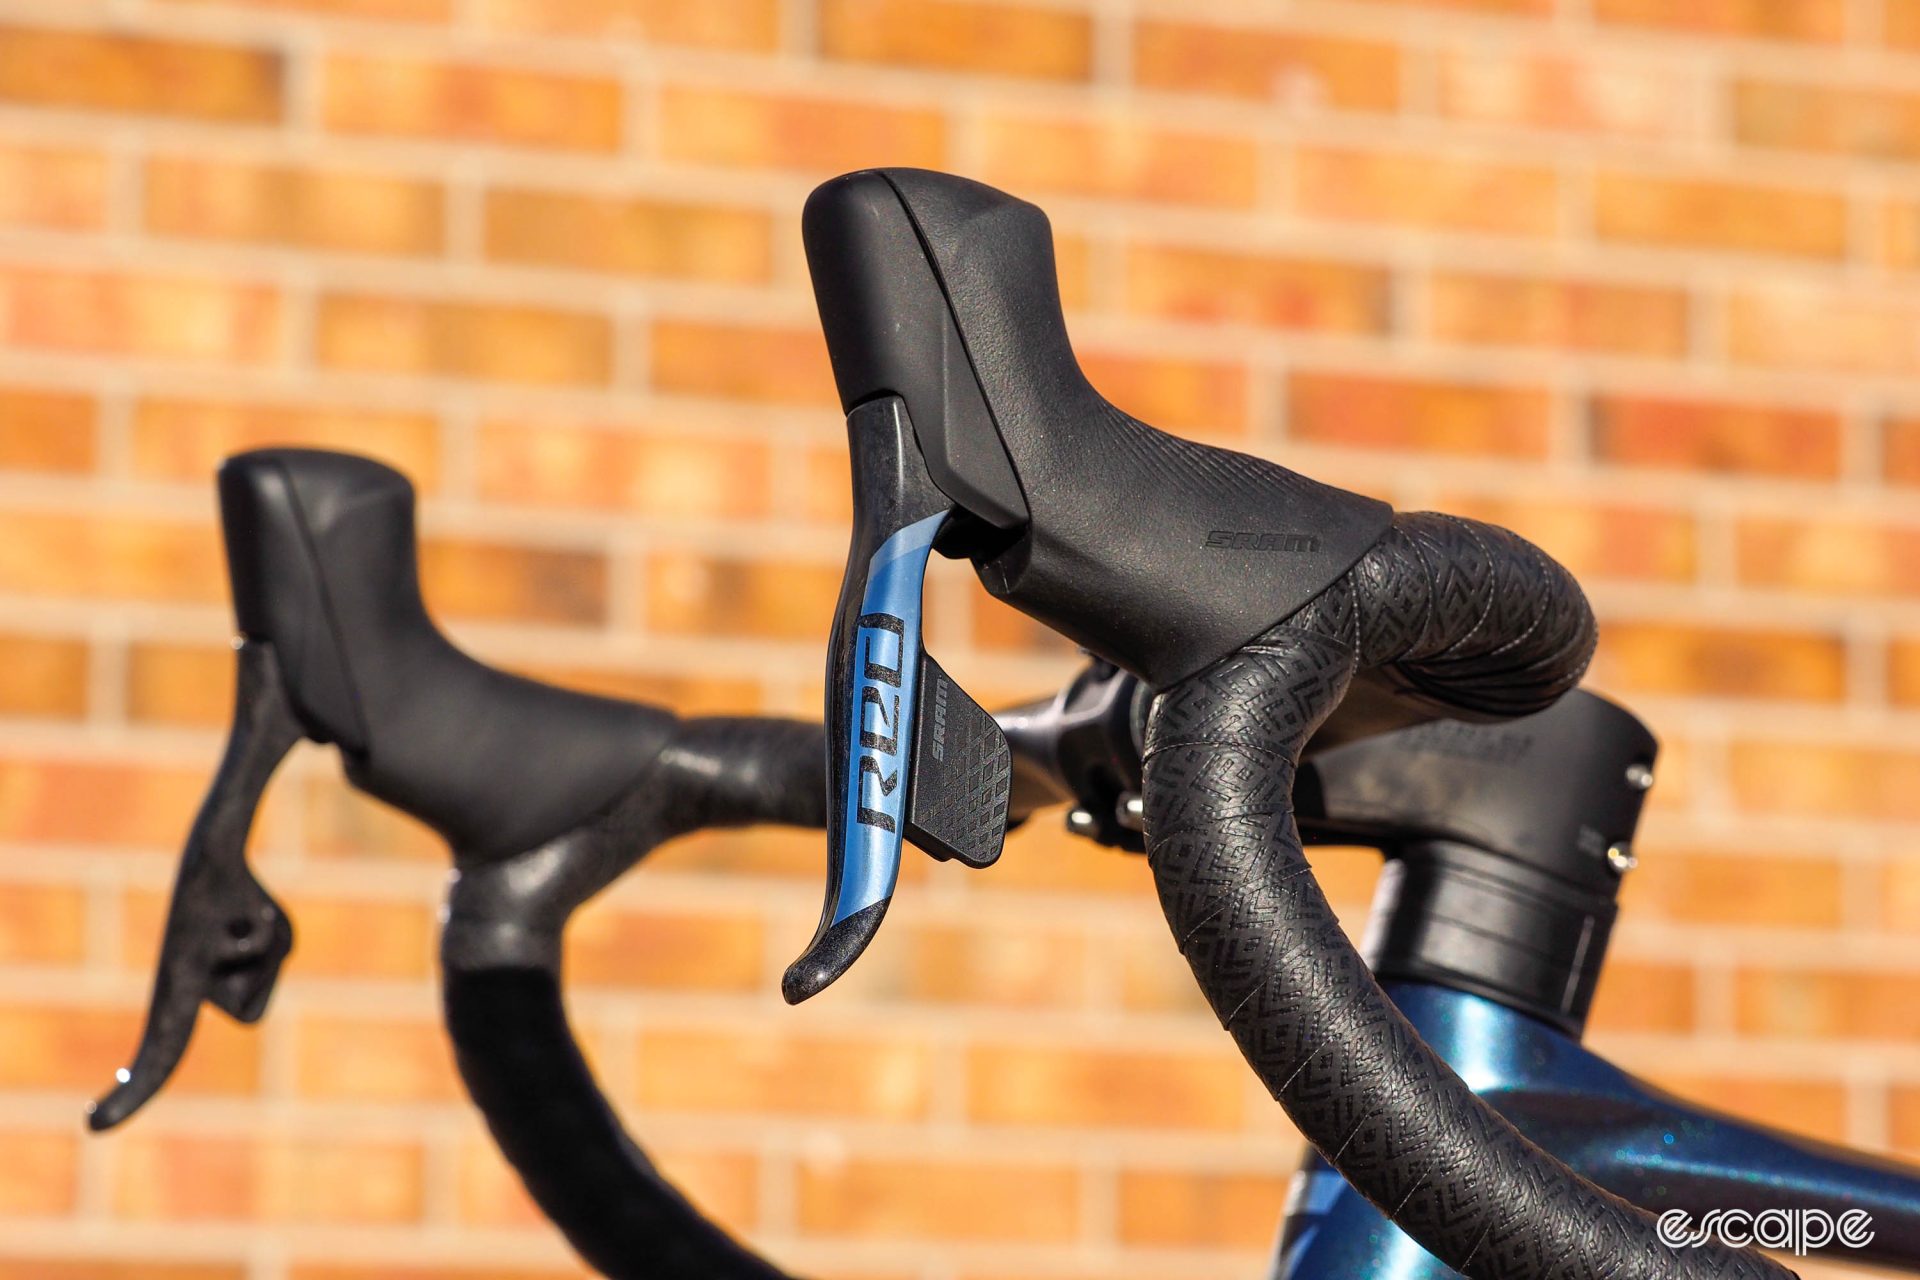 SRAM's Red AXS shifters in profile.